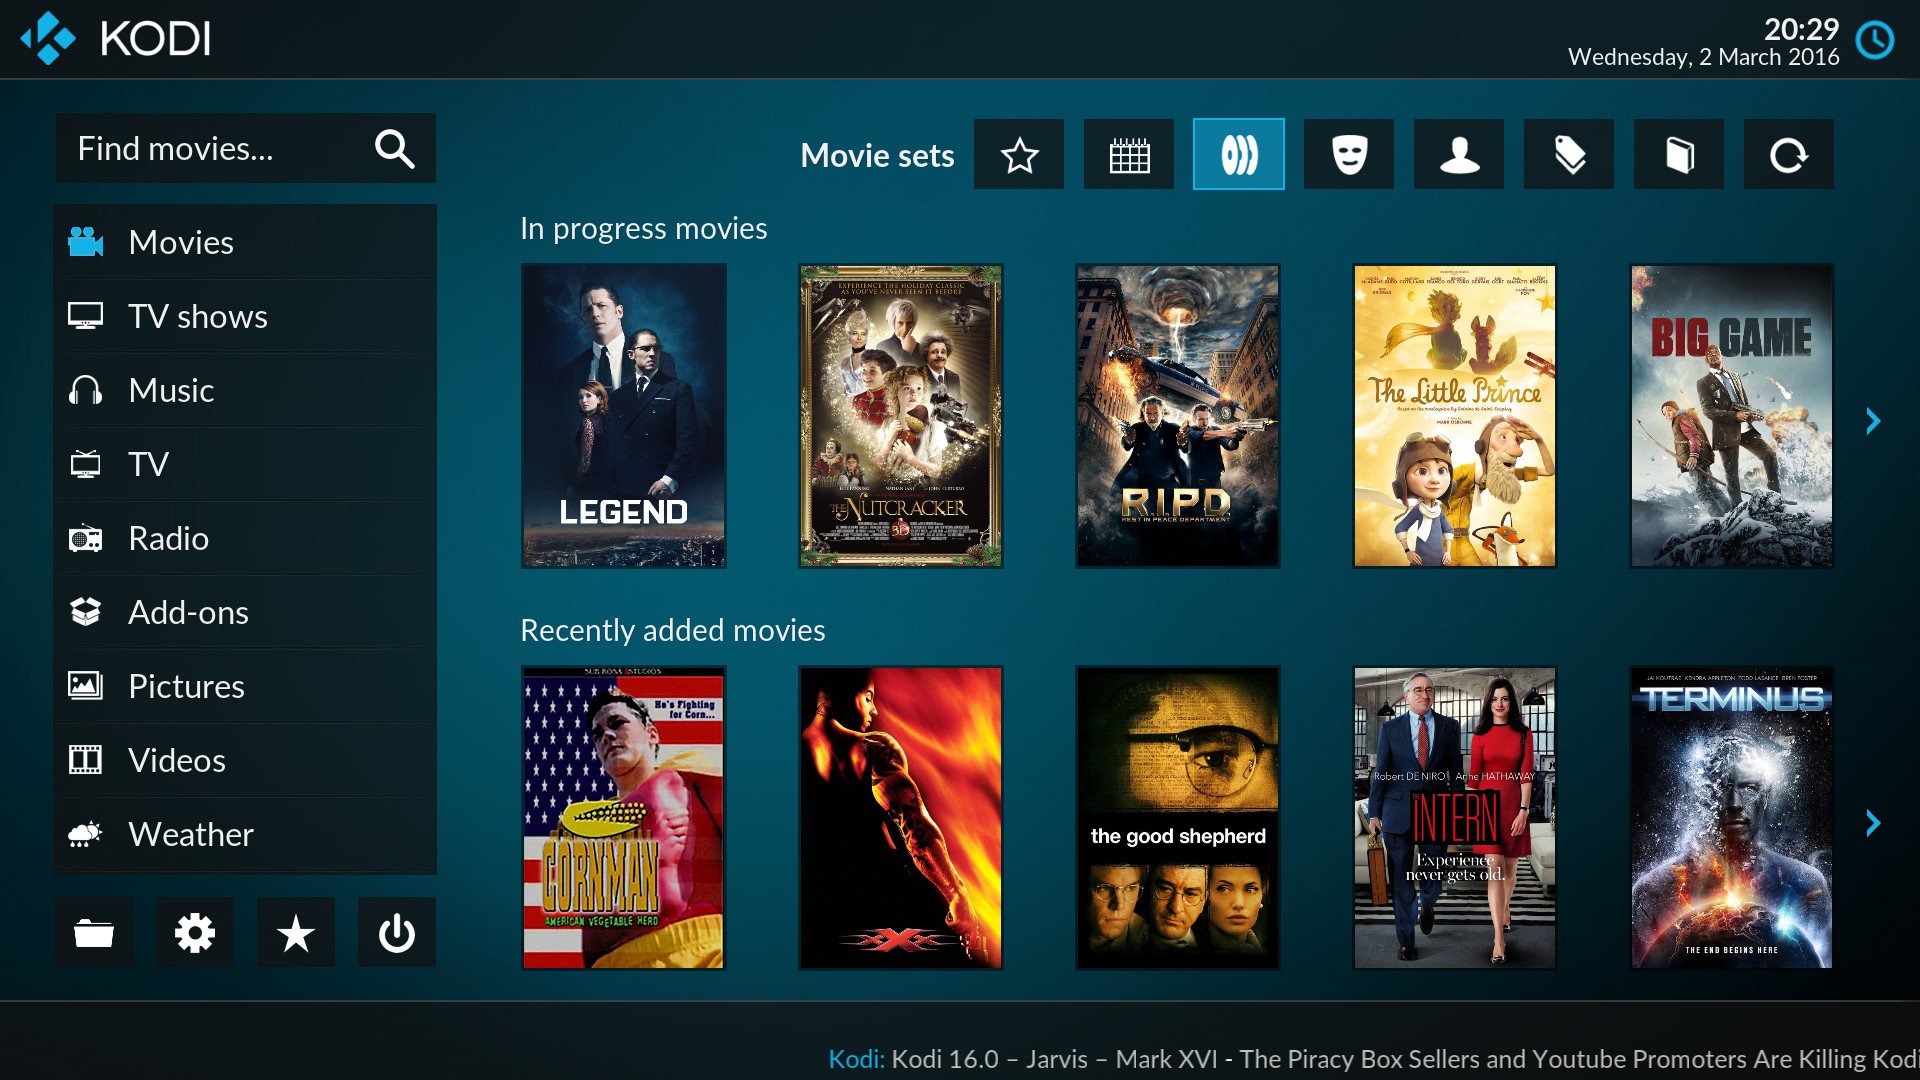 10 Amazing Kodi Tips and Tricks to Boost Your Experience - PC - it is awesome offering with huge amounts of amazing elements, not the most simple